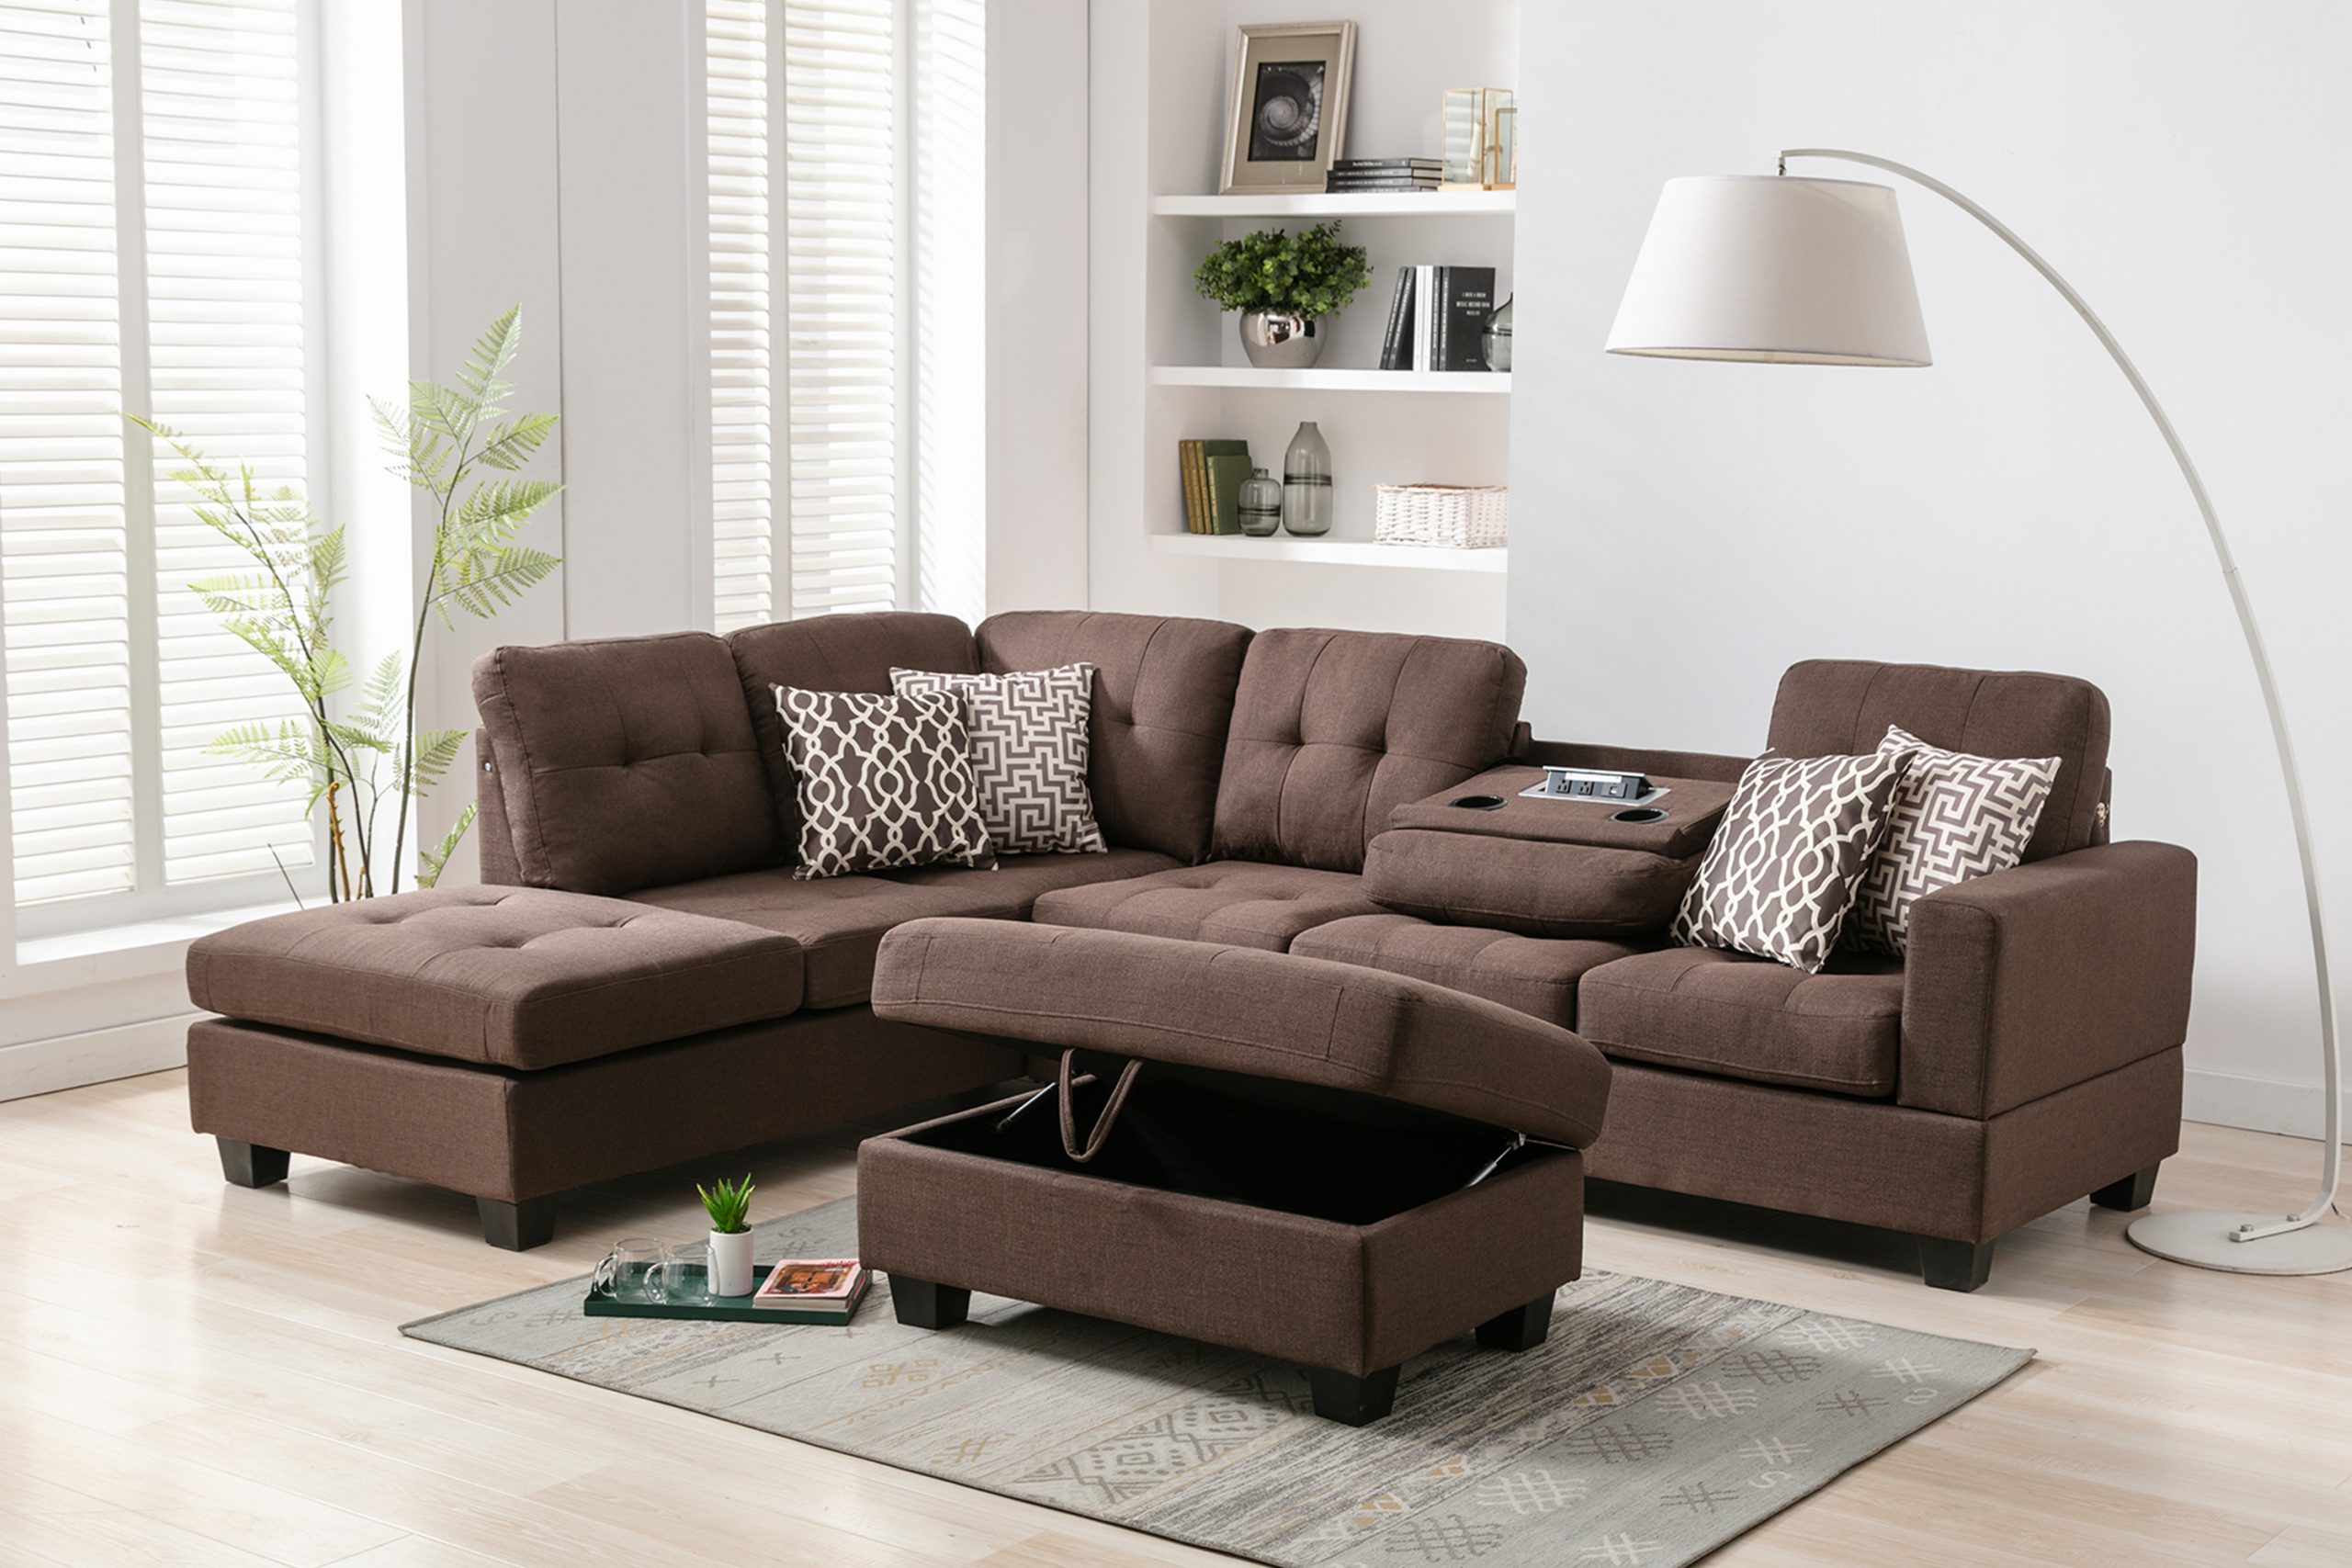 Reversible Sectional Sofa with 2 Outlets & USB Ports, Chocolate - SG000226AAA